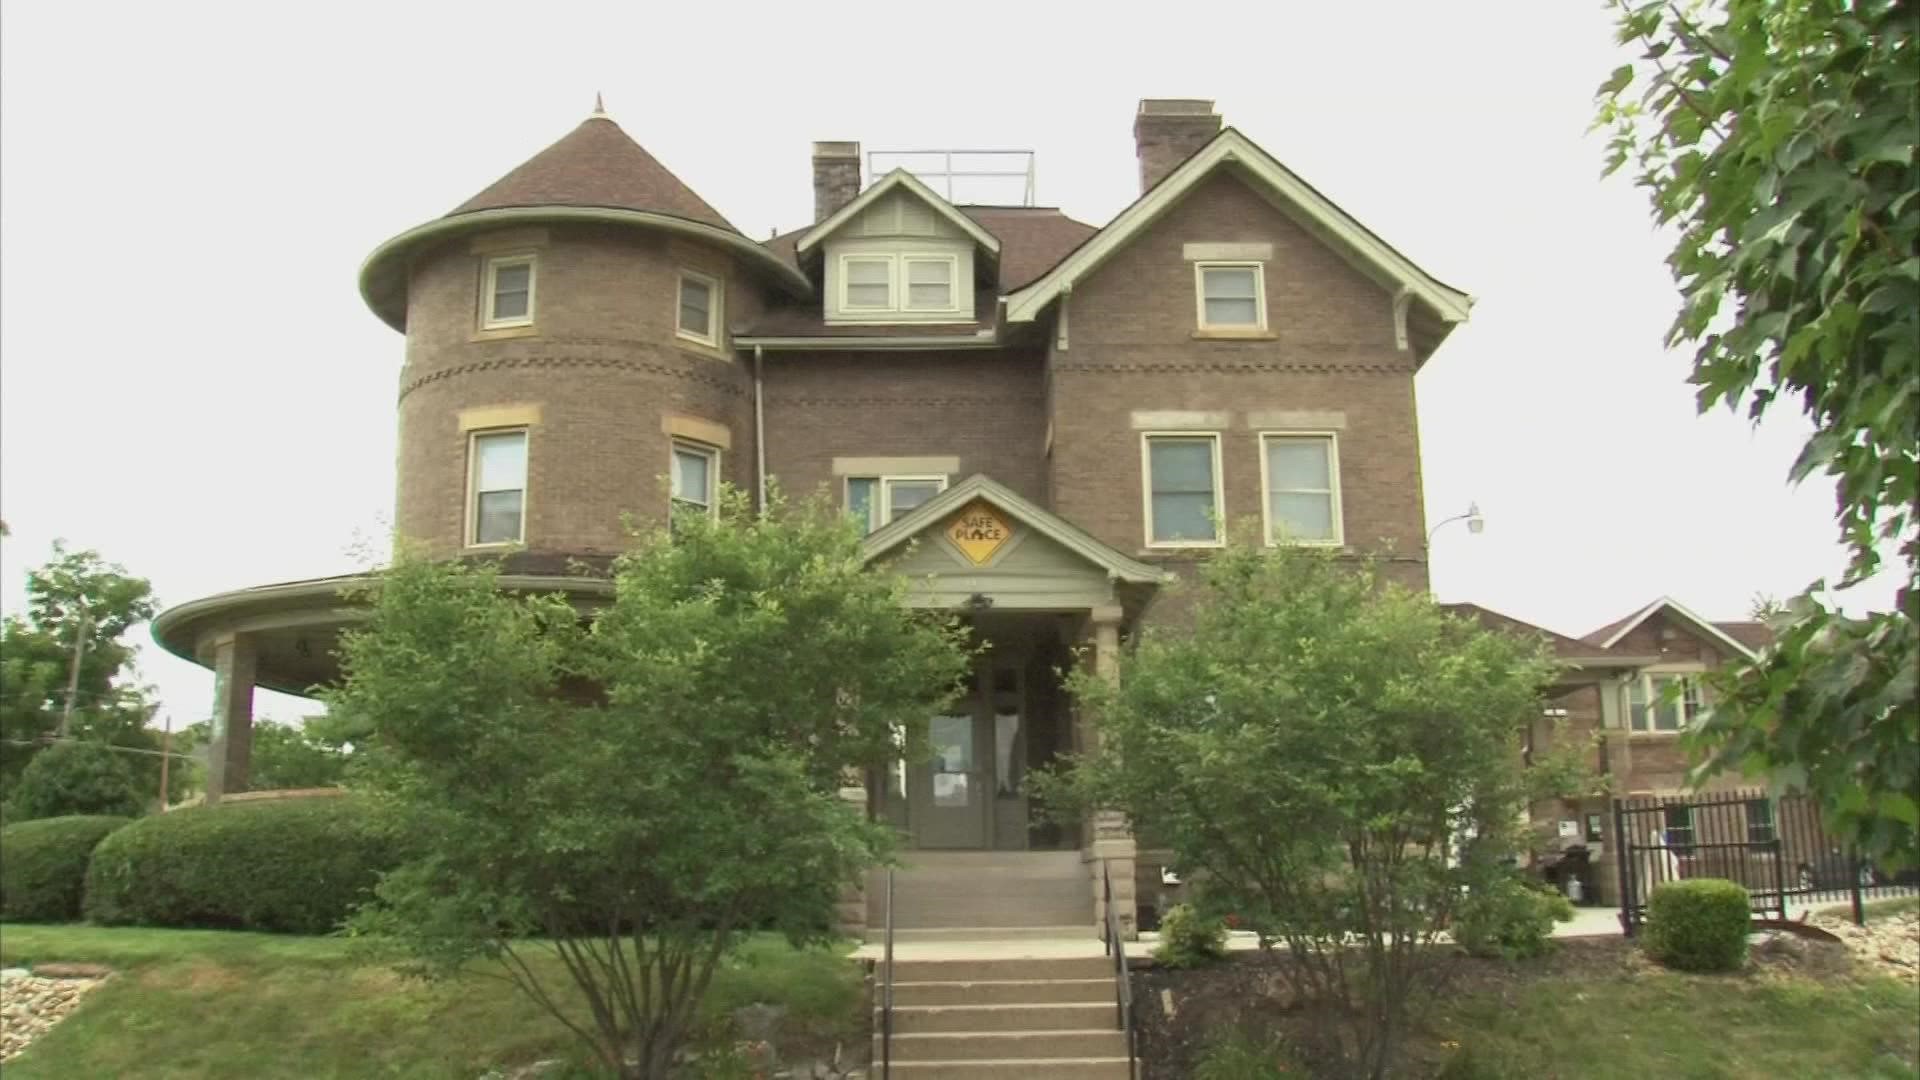 The Huckleberry House helps young people dealing with abuse, neglect and homelessness. The organization said they're helping more people because of COVID.